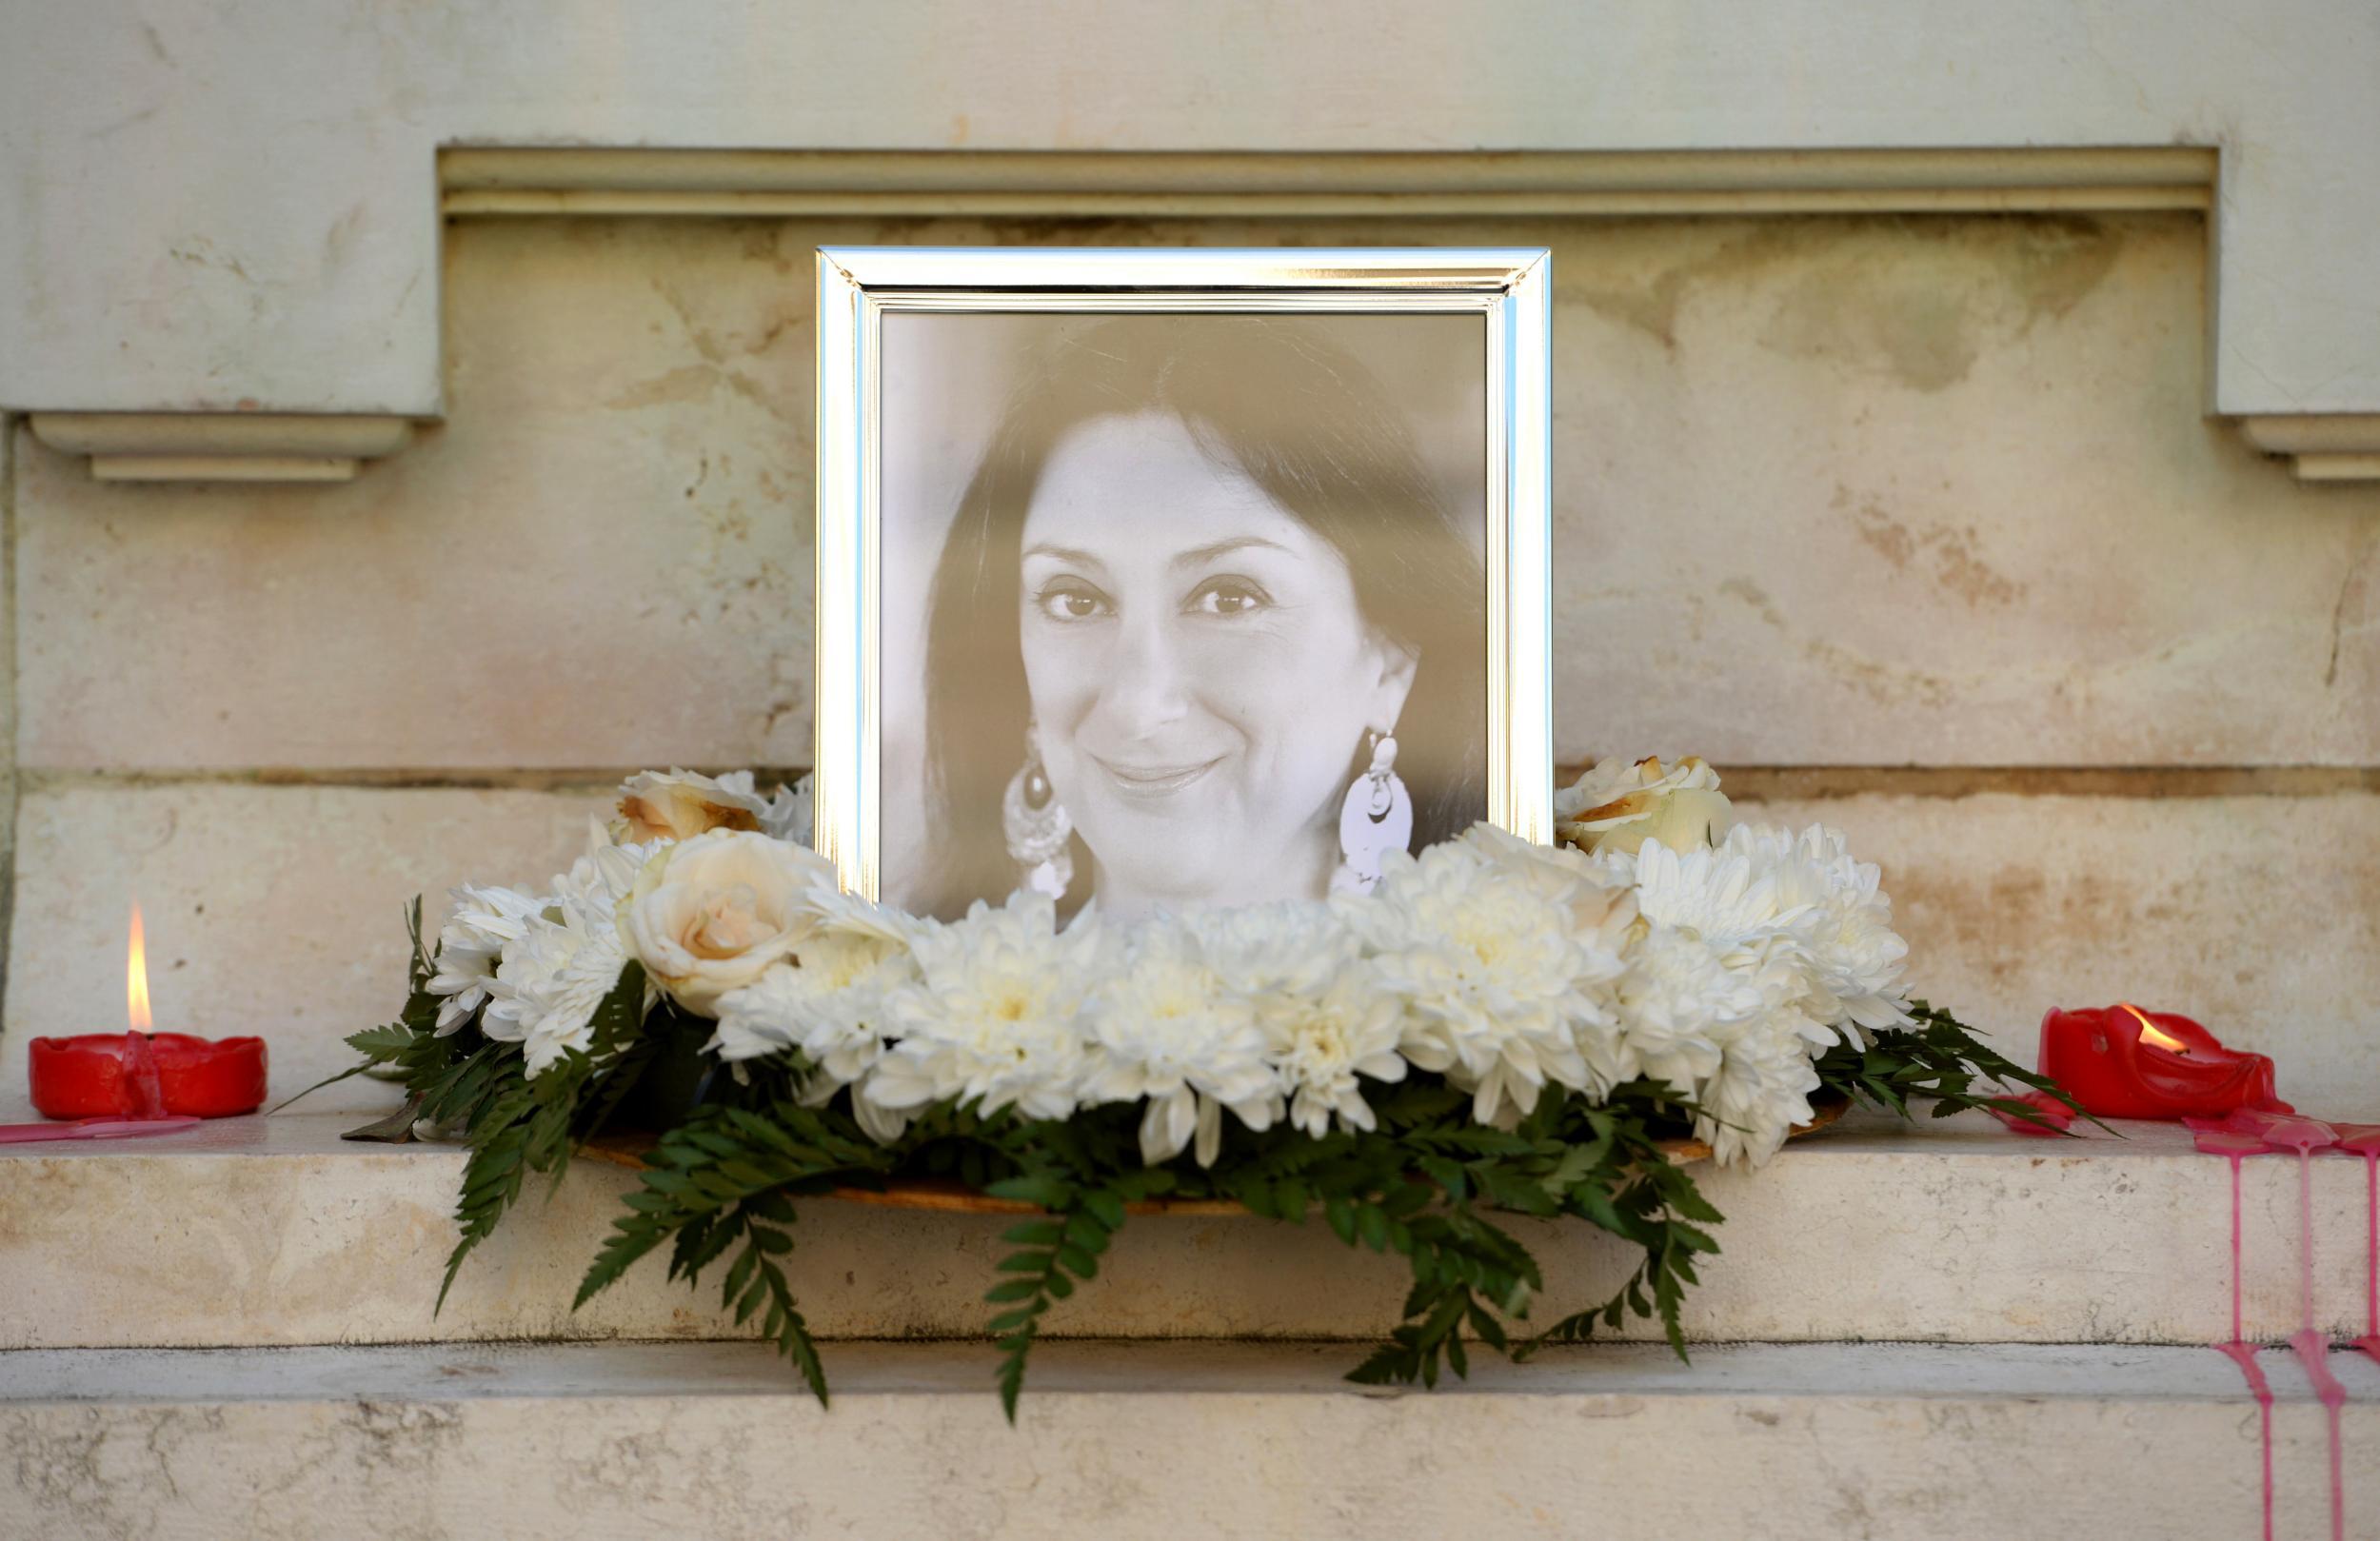 Flowers and tributes at a shrine for Maltese journalist and blogger Daphne Caruana Galizia who was killed by a car bomb outside her home in October